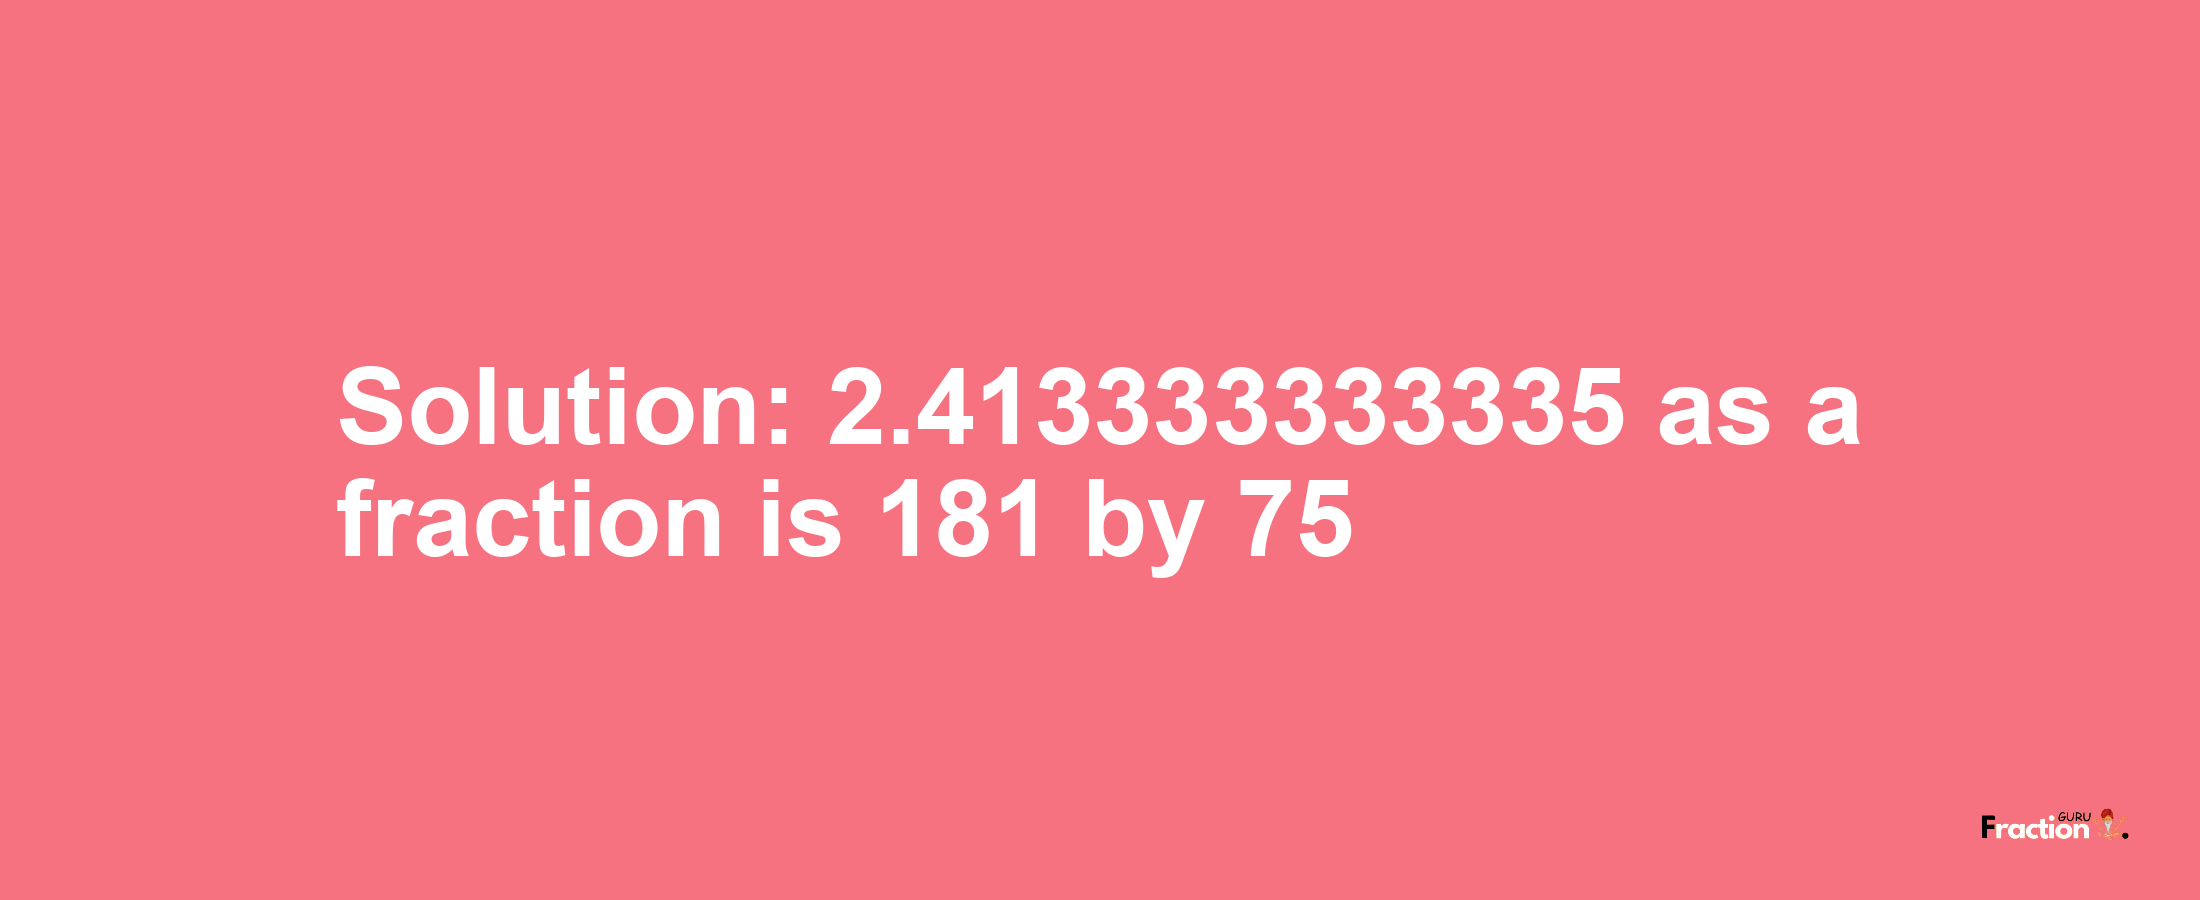 Solution:2.413333333335 as a fraction is 181/75